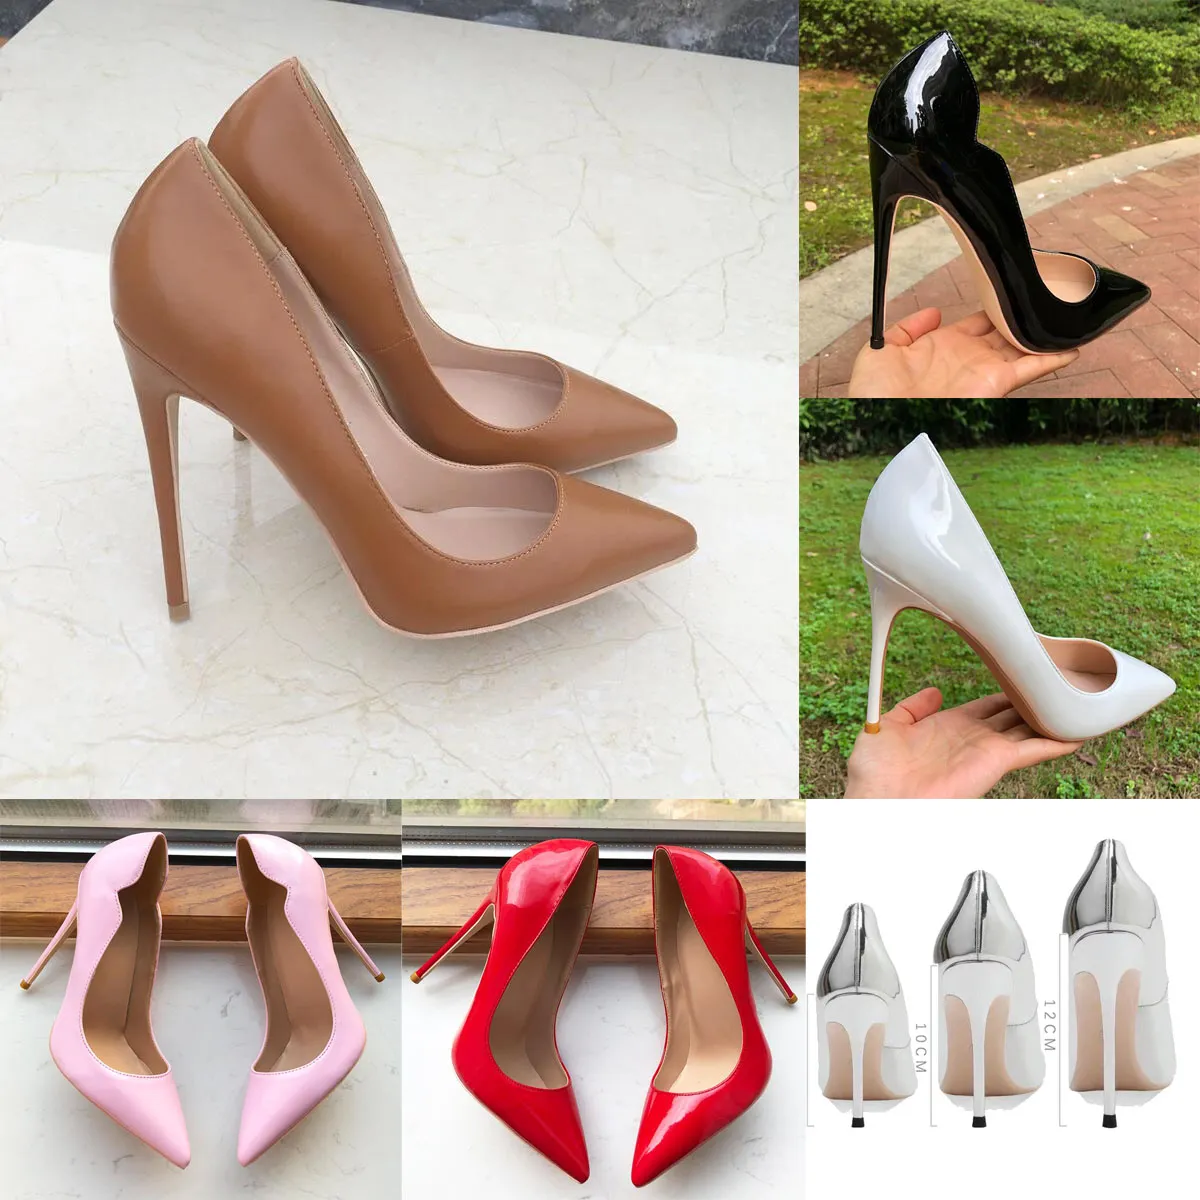 10 Cm Big Size Red Bottom High Heels Brand Pattern Leather Women Pumps  Pointed Toe High Heels Shoes Plus Size 35-46 | Wish